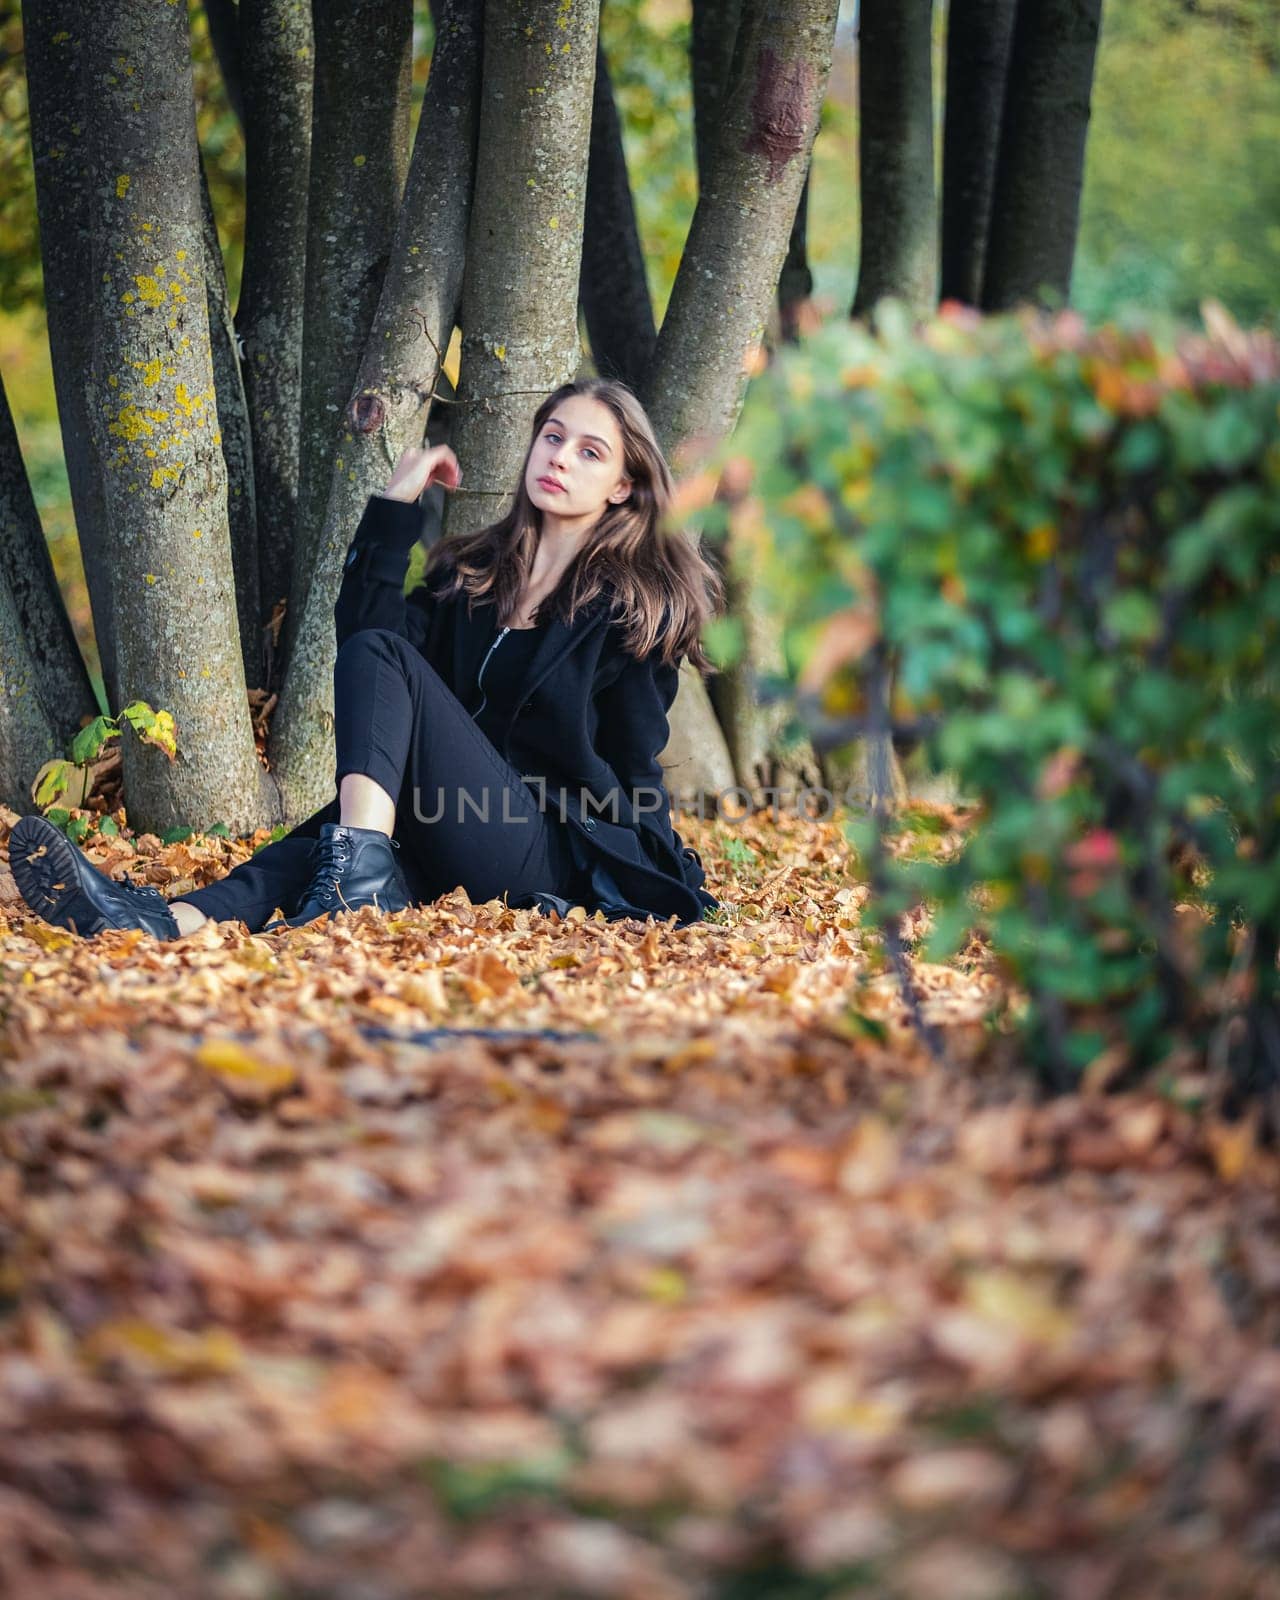 A beautiful girl sits by a tree on fallen leaves in an autumn park